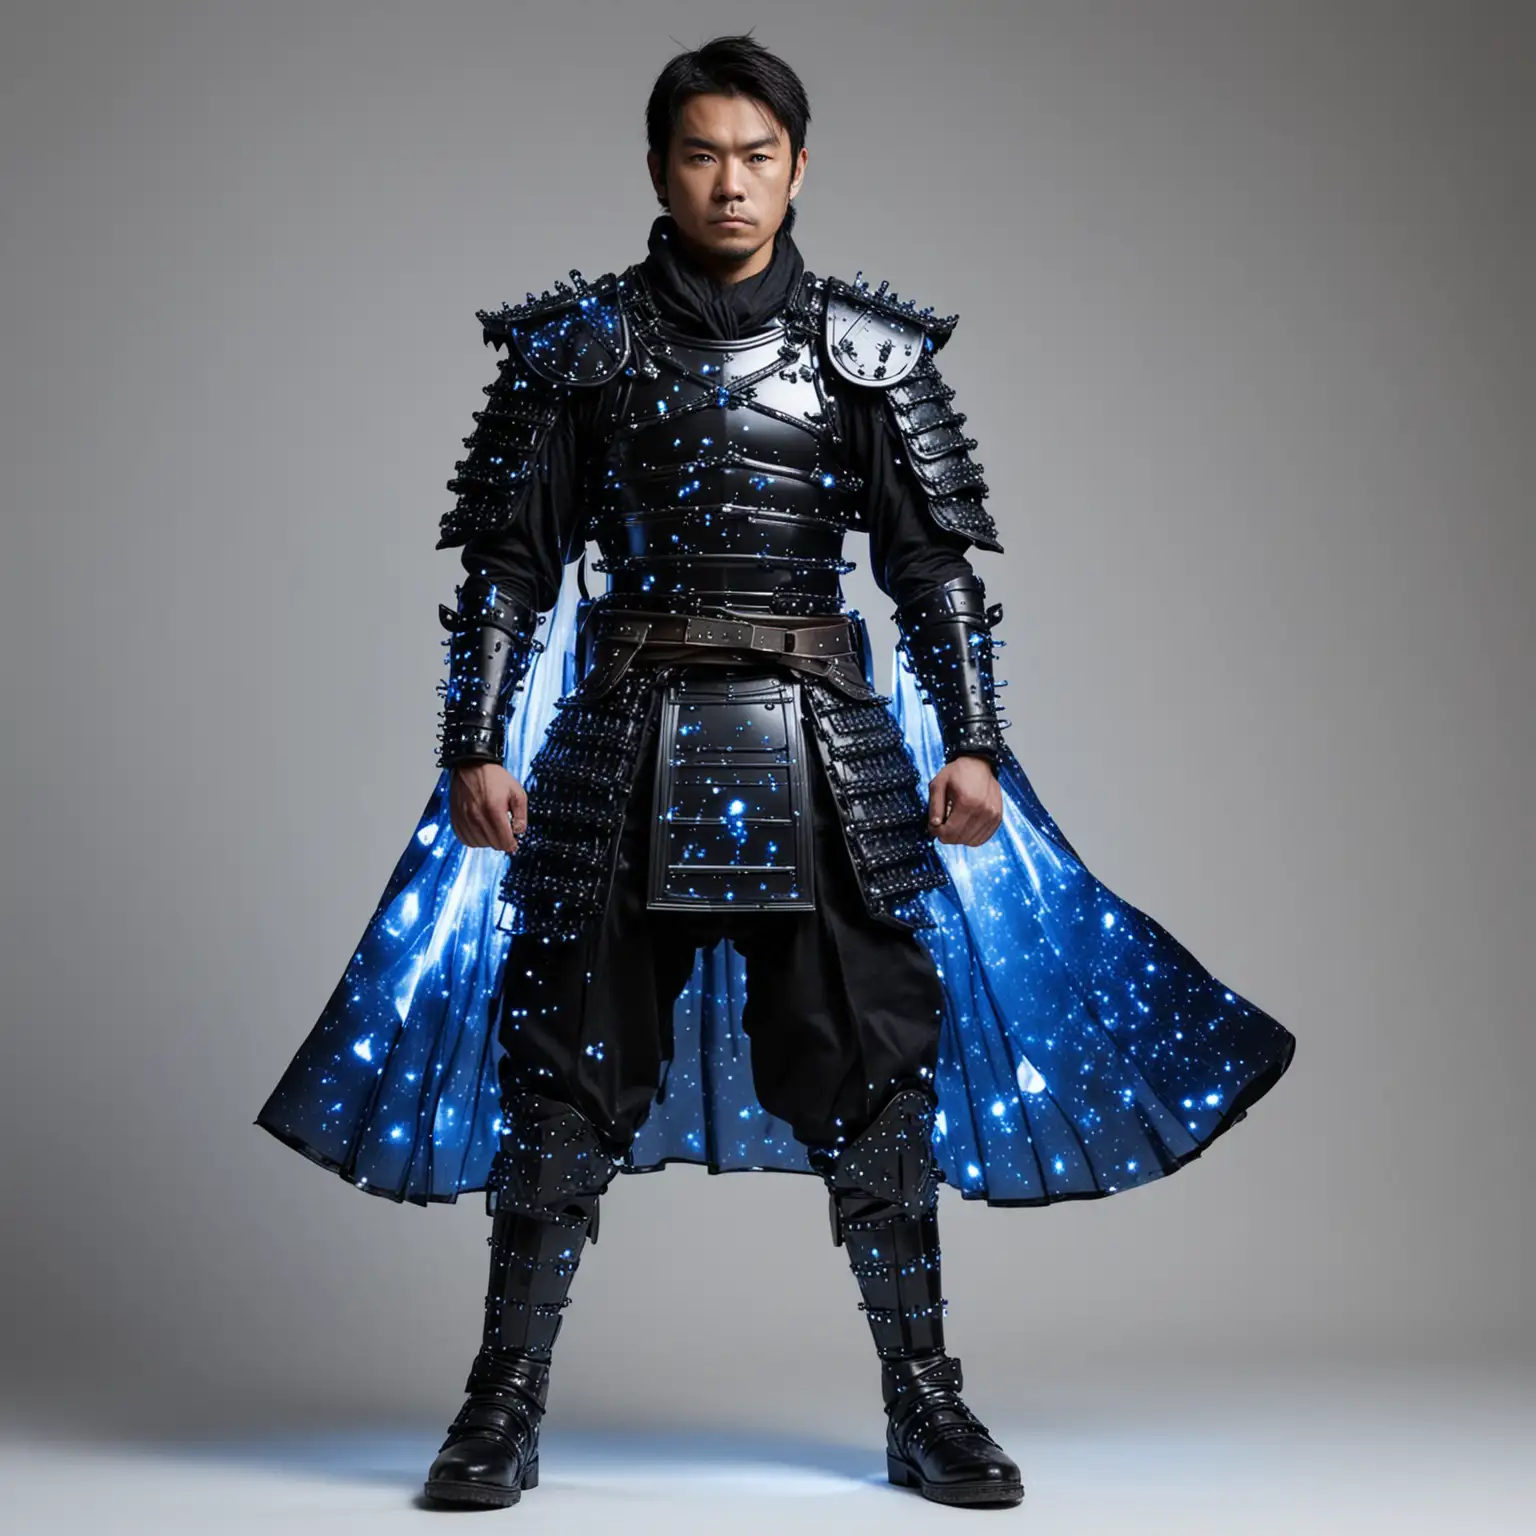 Standing full body view, Strong heroic Japanese man in black plastic samurai armor with glowing blue LED's forming constellations, blue cape, black boots, boots, white background